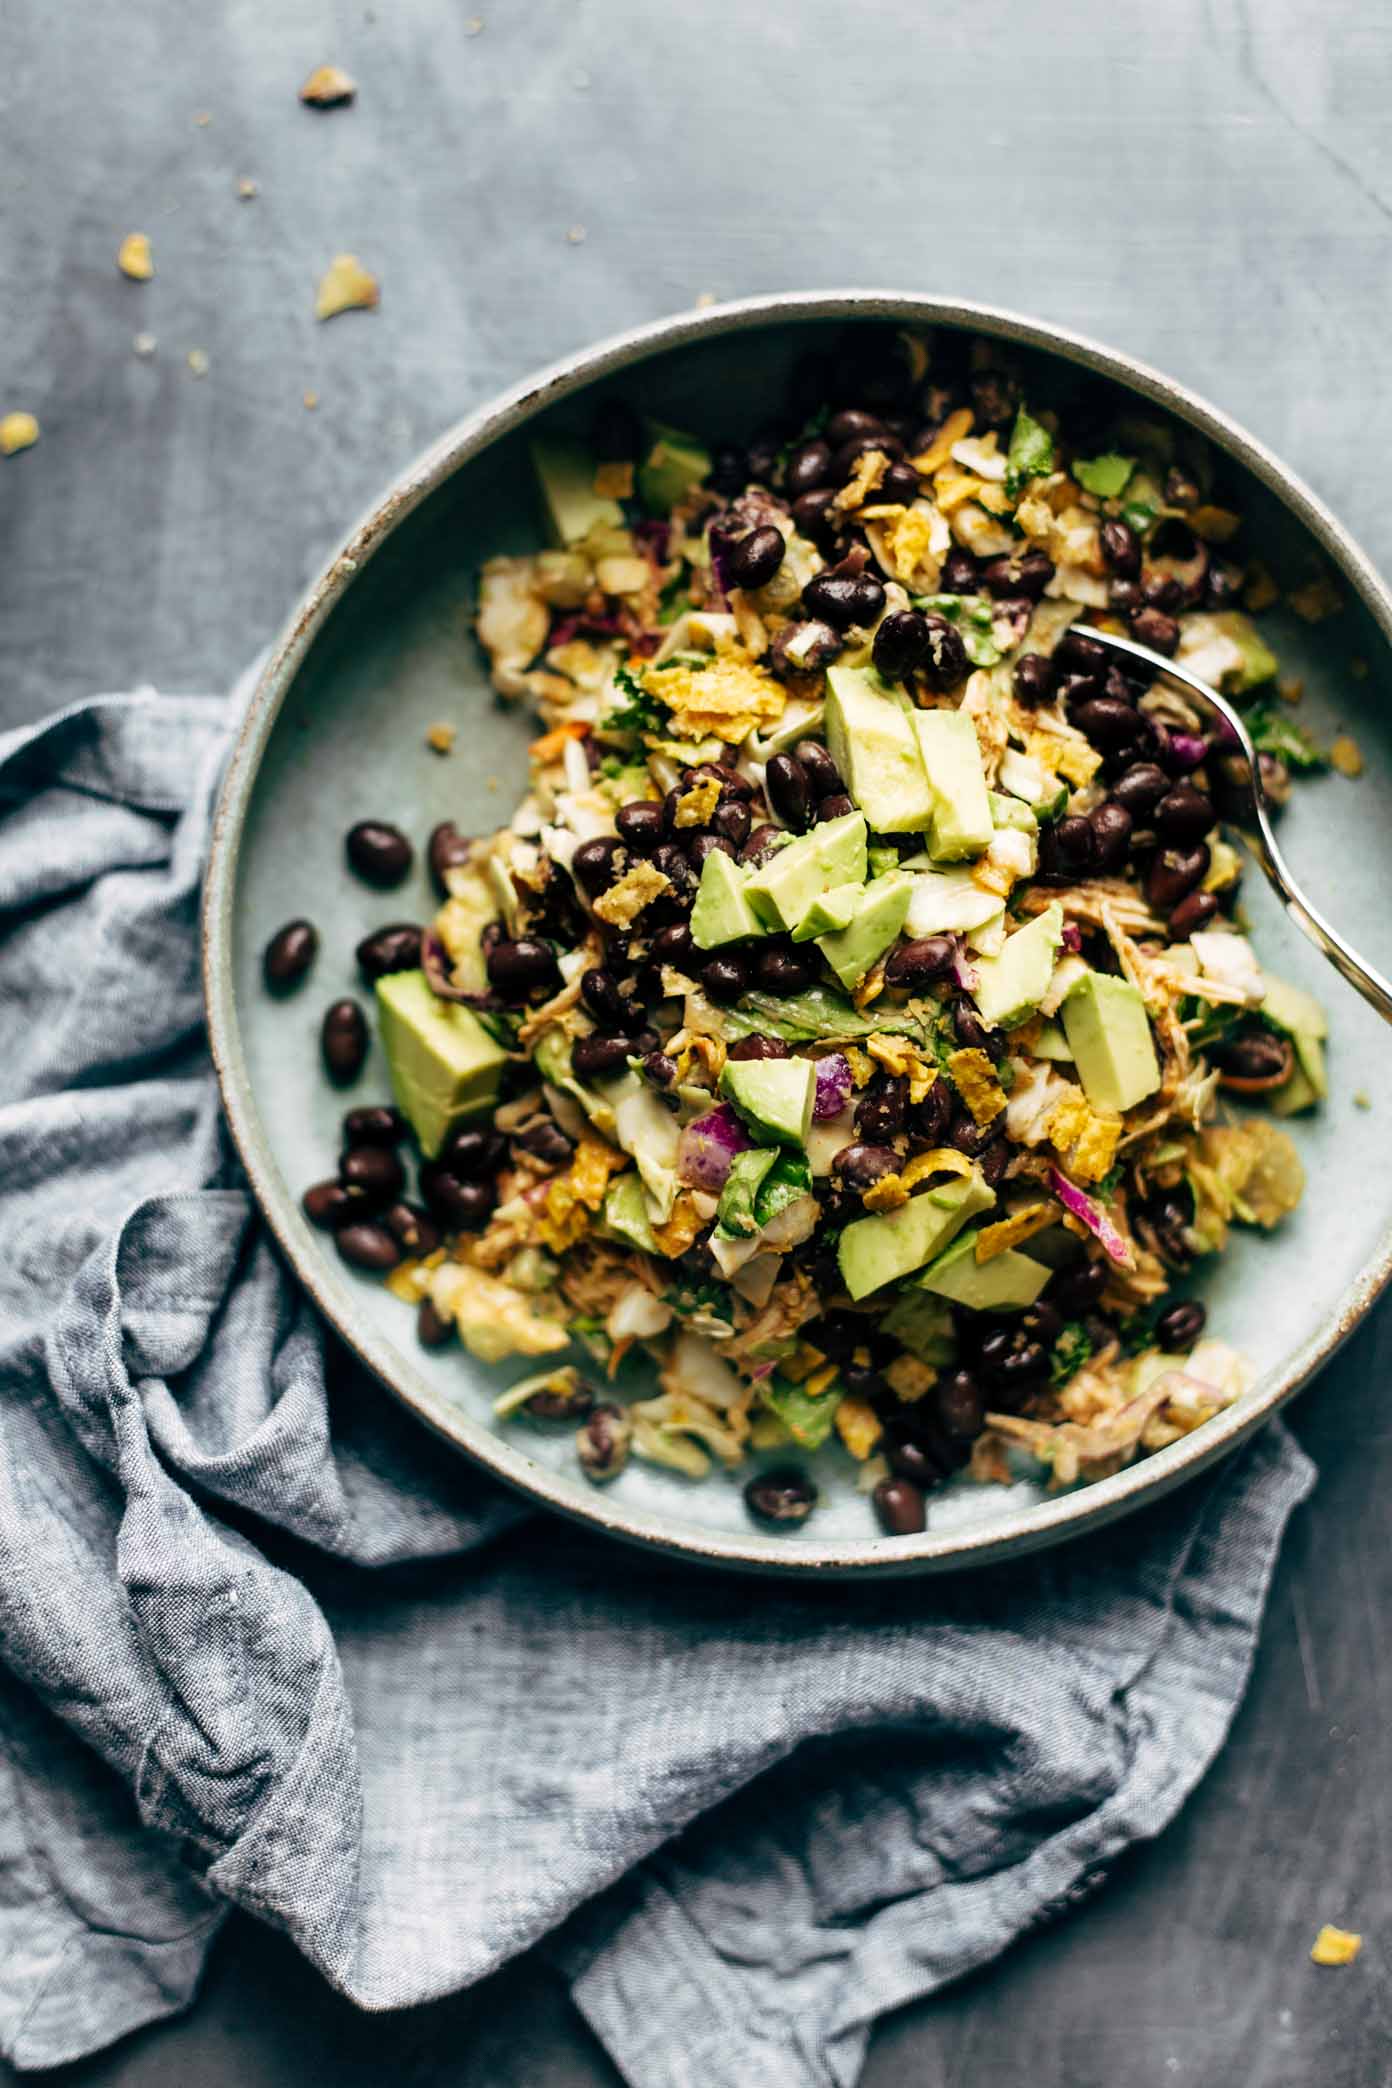 Cheater's Power Salad - kale, cabbage, avocado, green onion, cilantro, black beans, crispy onions, tortilla strips, chicken, and BBQ ranch dressing, made from a salad mix! I KNOW. perfect for easy lunches! | pinchofyum.com